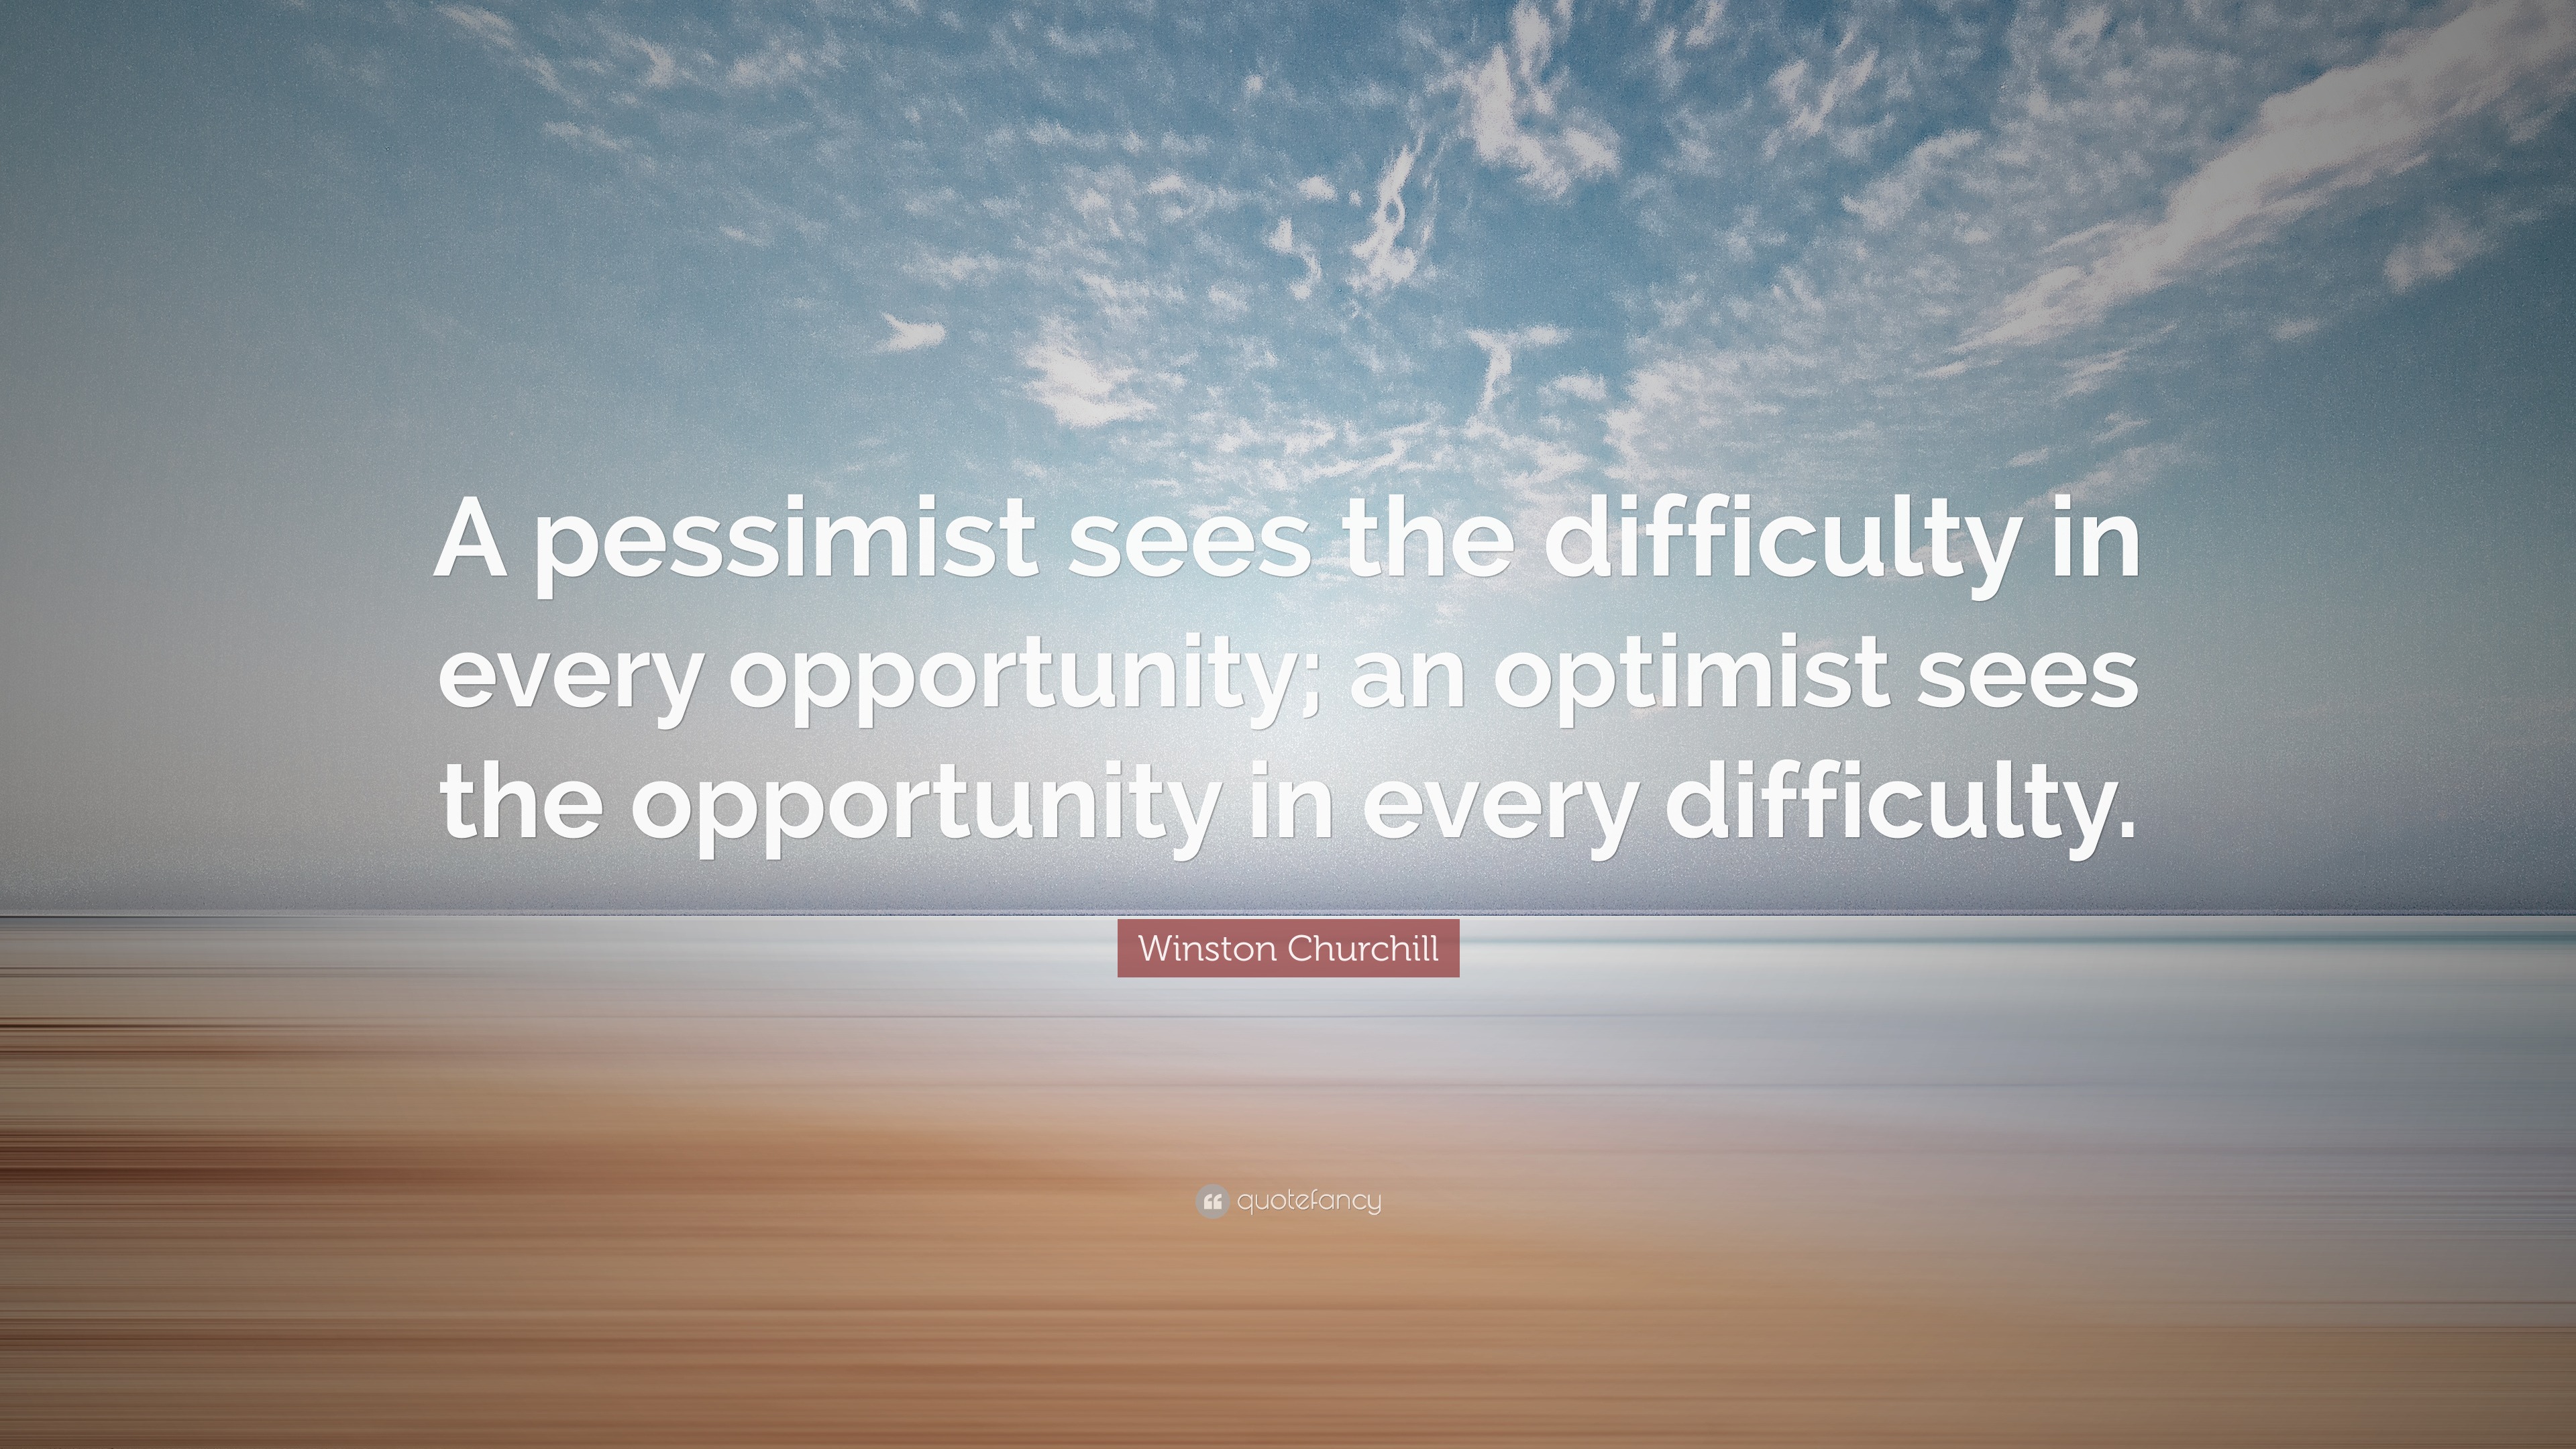 Winston Churchill Quote: “A pessimist sees the difficulty in every